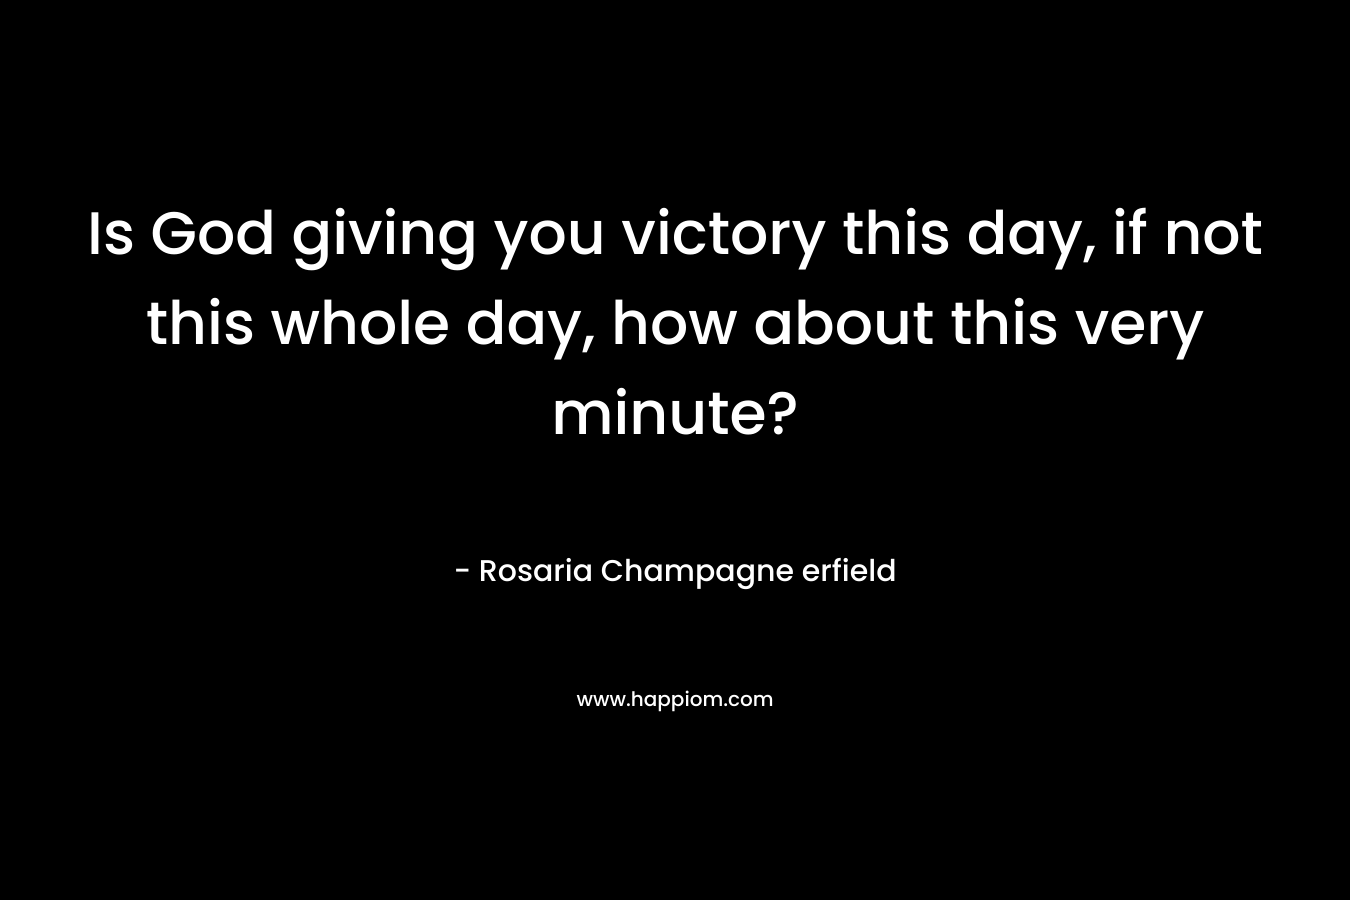 Is God giving you victory this day, if not this whole day, how about this very minute? – Rosaria Champagne erfield